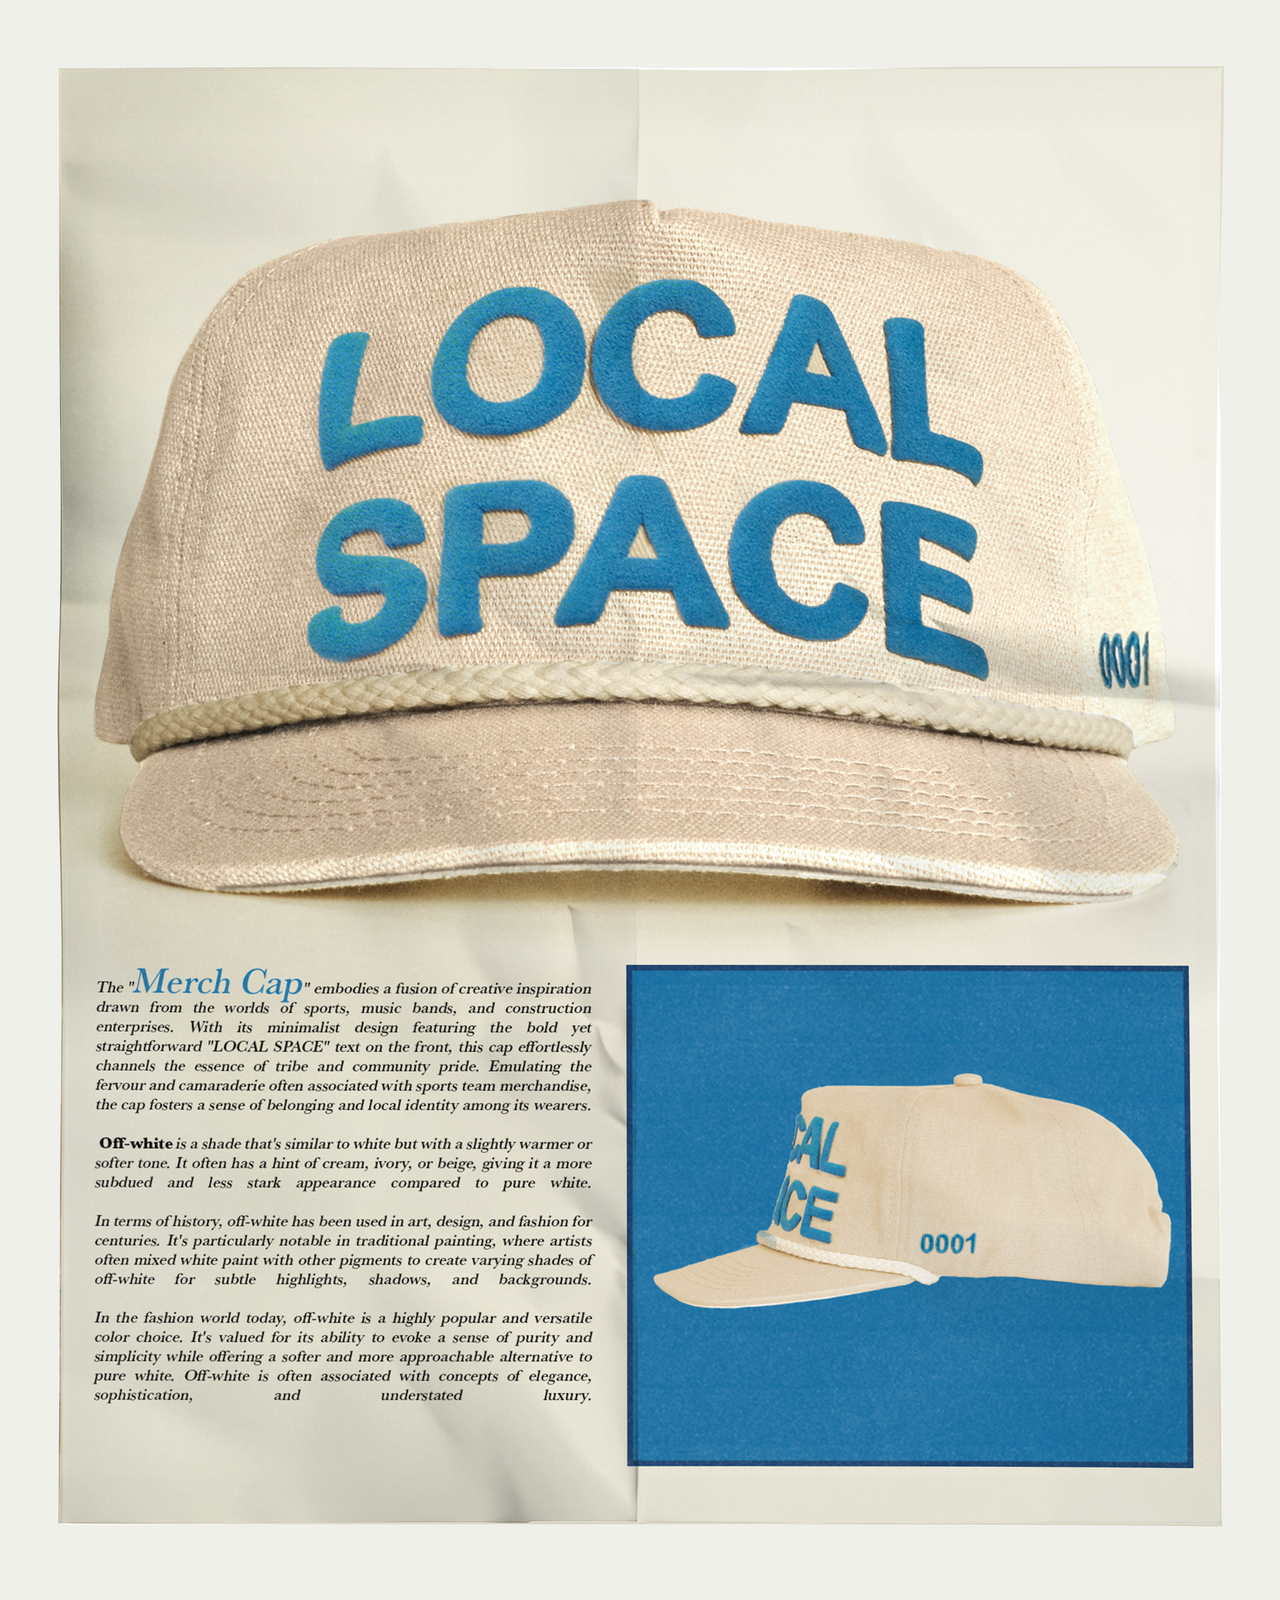 Off-white Merch Cap featuring 'LOCAL SPACE' in puff print on the front, 'ISSUE 0001' embroidery on the side, vintage snapback fit, and a slightly curved brim, made from 100% cotton canvas.